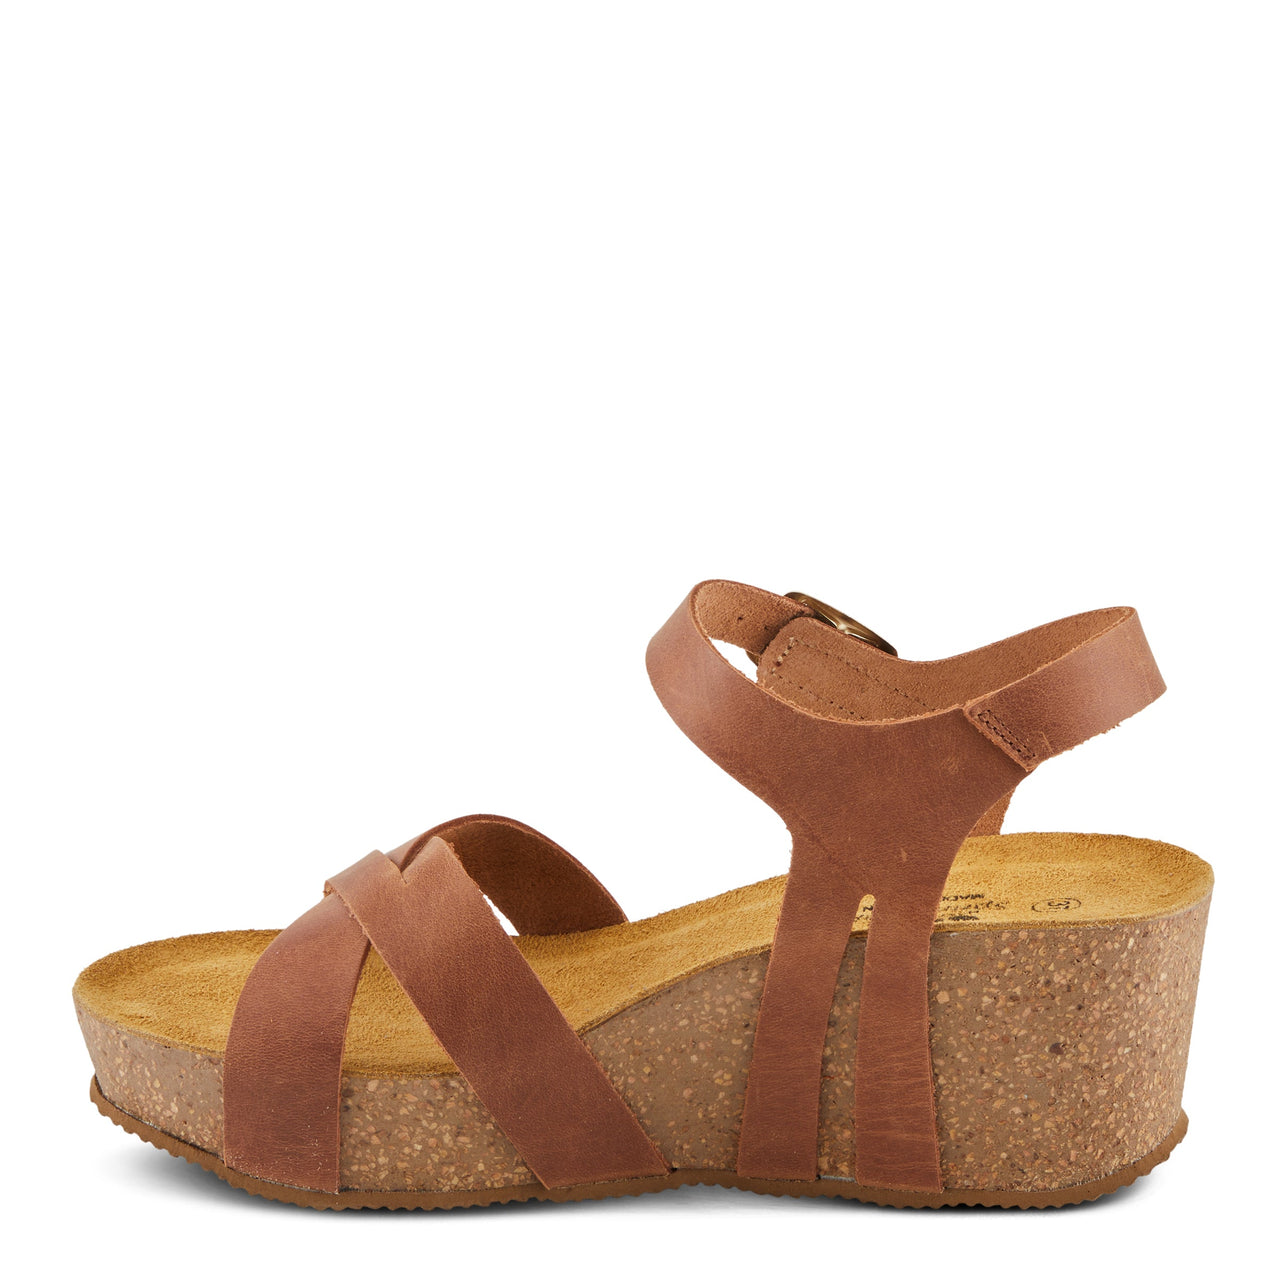 Spring Step Burton Sandals in brown leather with cushioned insole and adjustable ankle strap for comfortable and stylish summer footwear